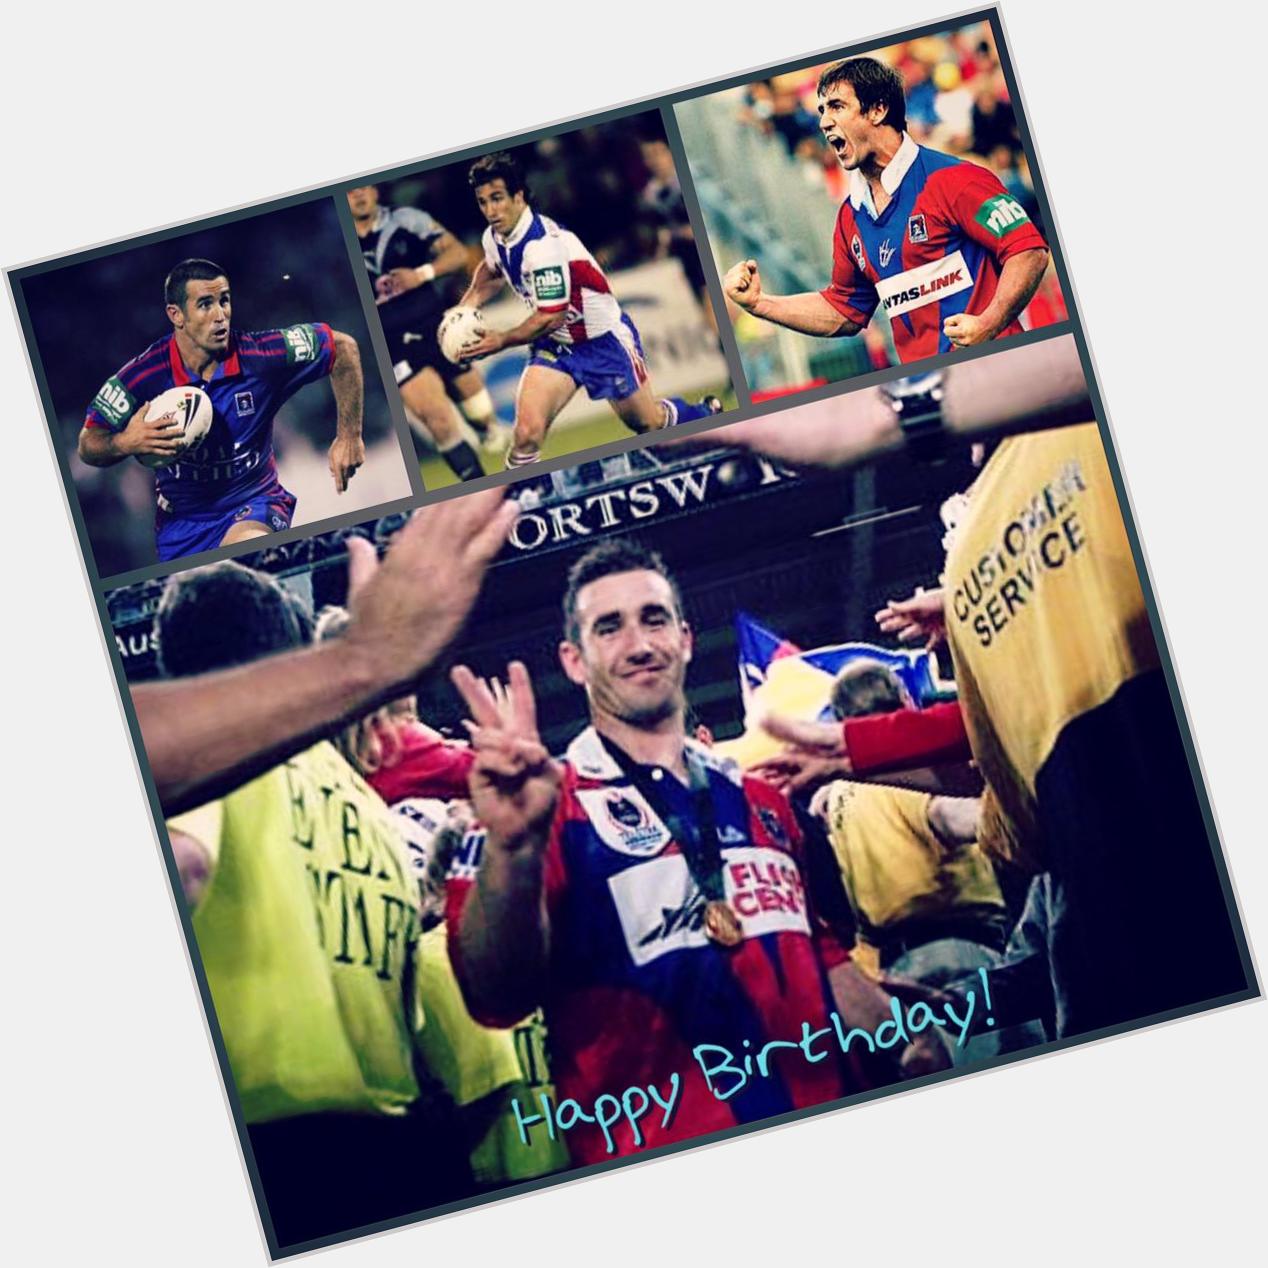 Happy 41st birthday to Knight Andrew \Joey\ Johns. 249 games for the Knights and an amazing legacy left. 